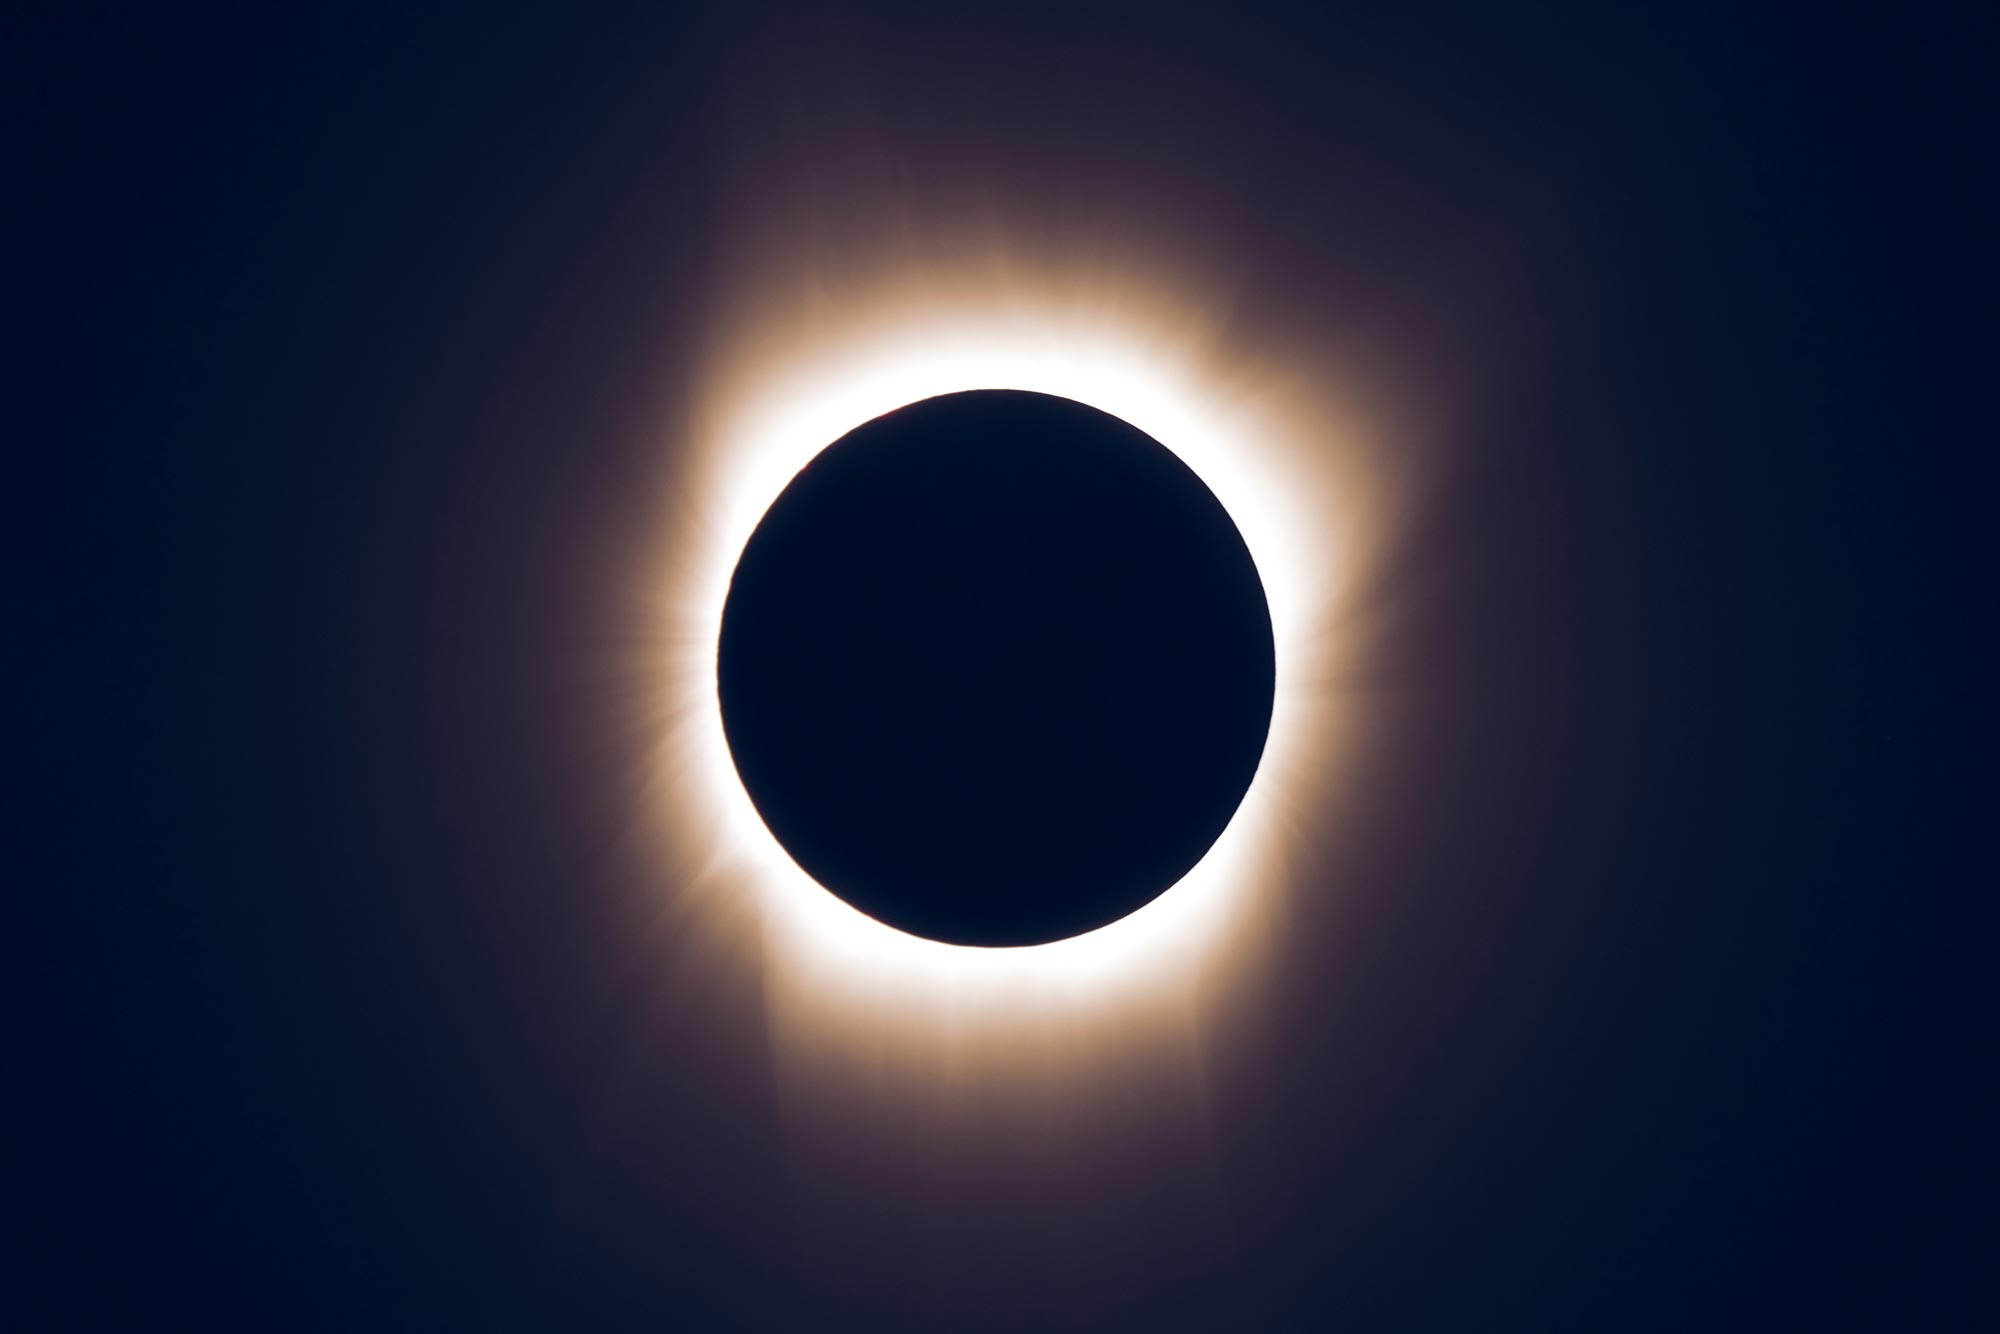 A total solar eclipse with the sun shining out around the moon